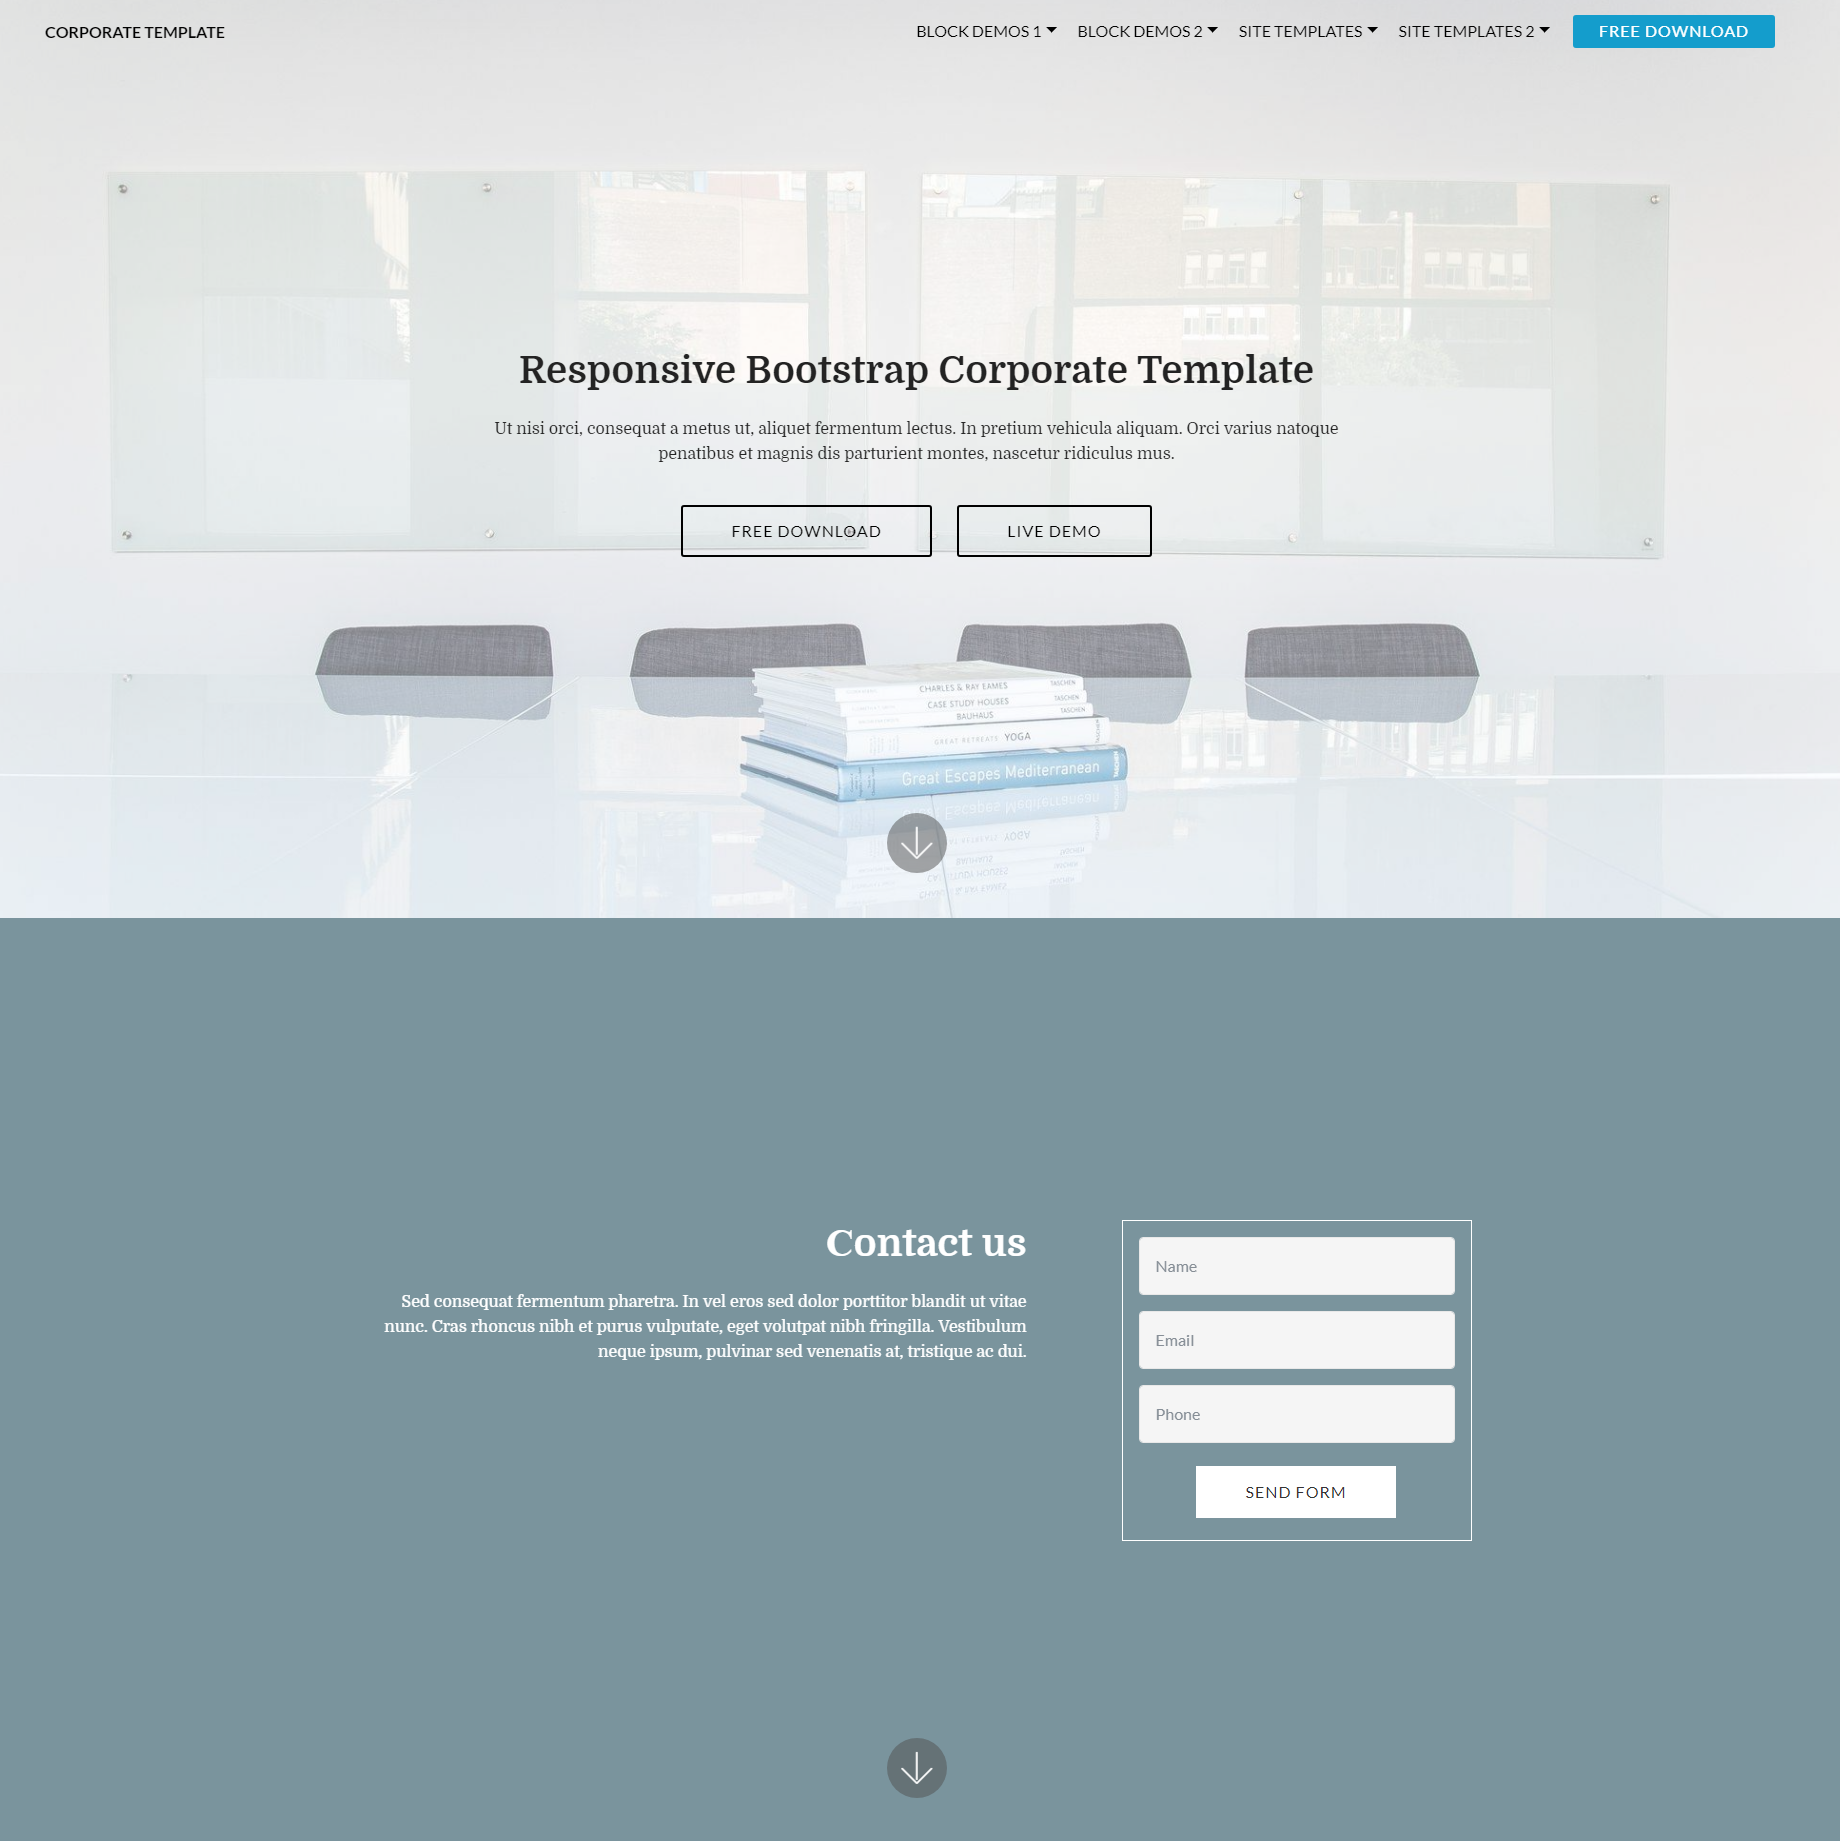 Responsive Bootstrap Corporate Templates